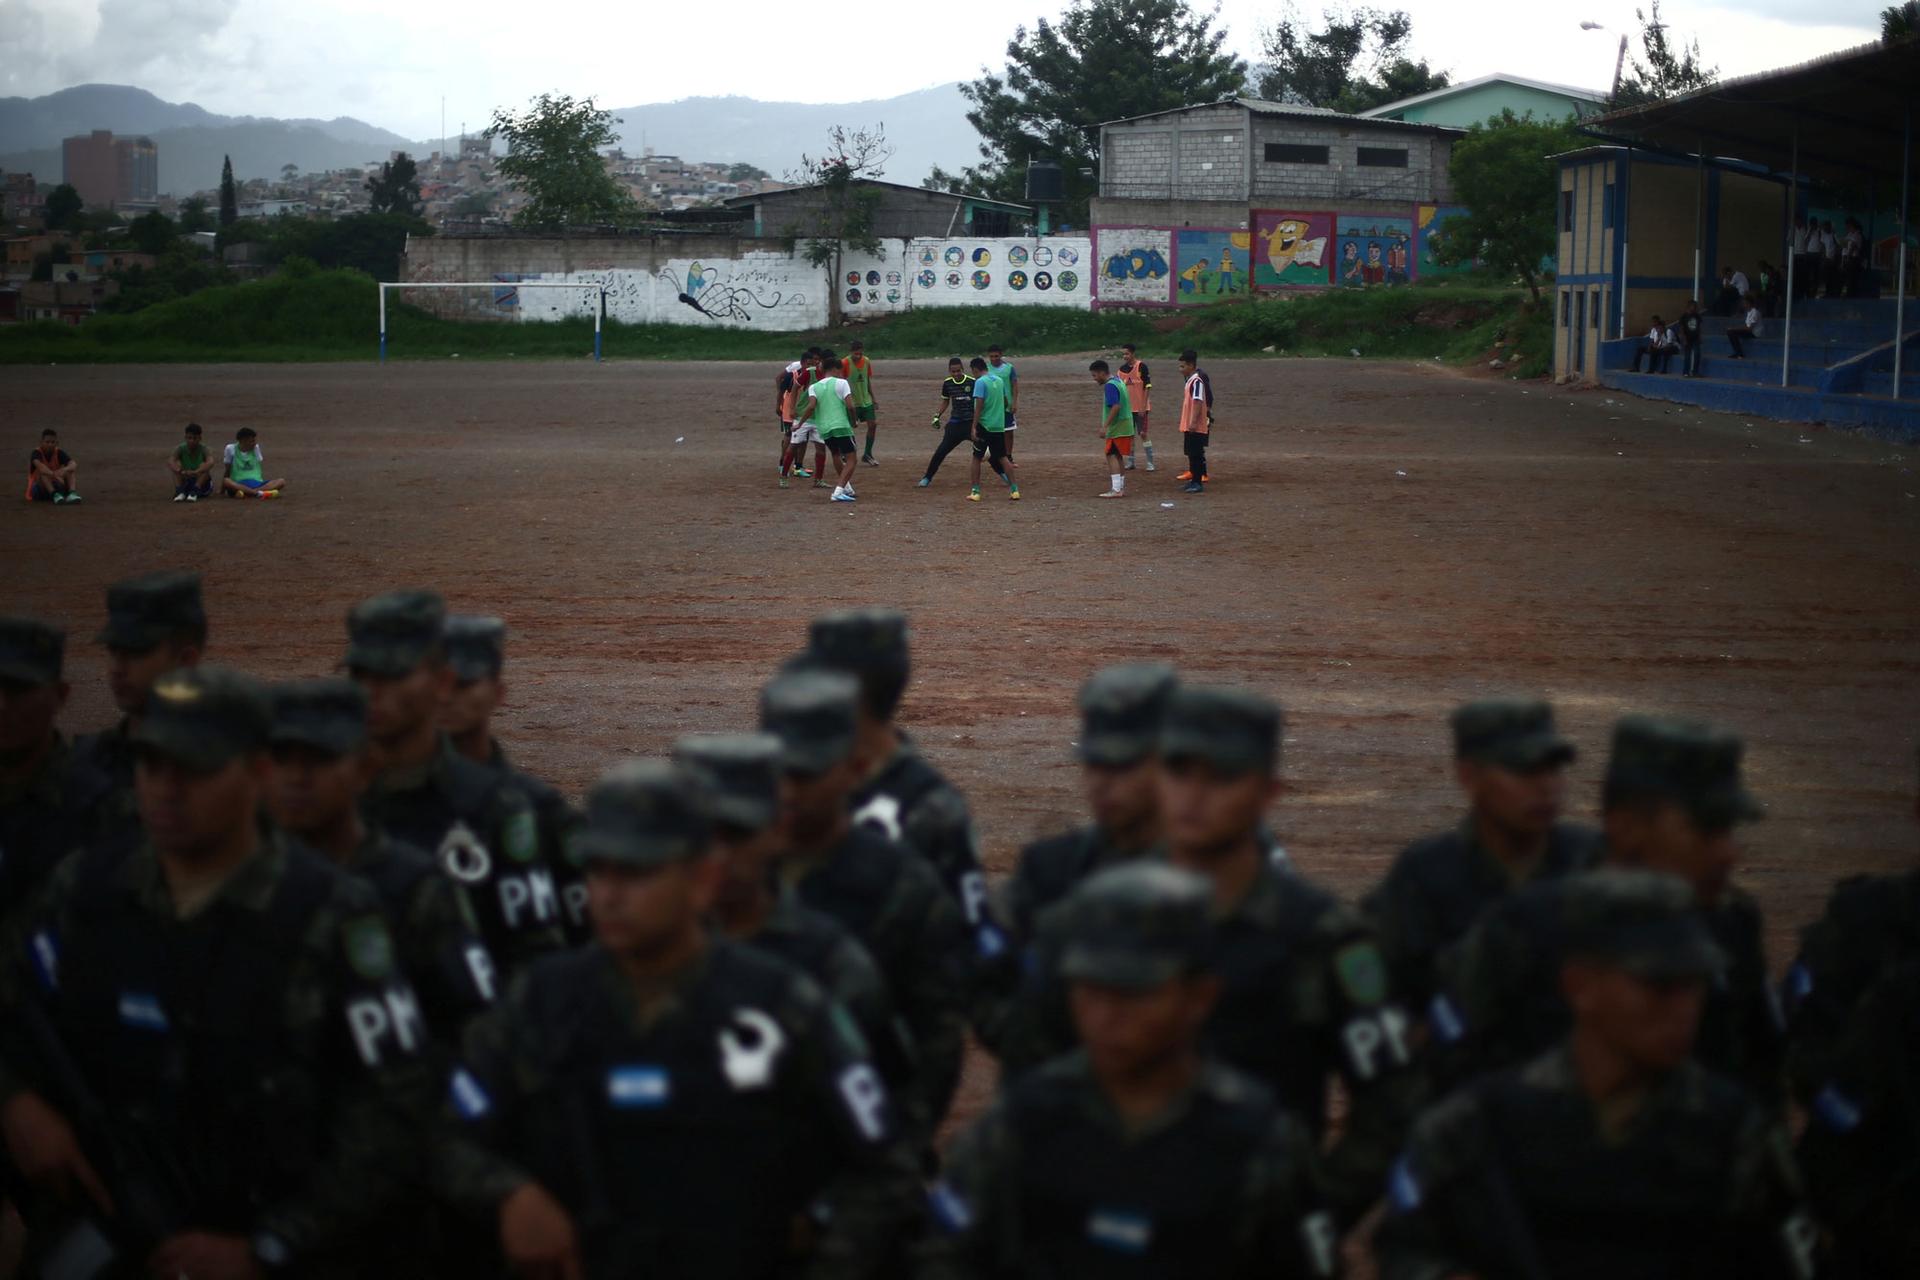 A group of people play soccer in the distance as soldiers are shown in the near ground lined up.